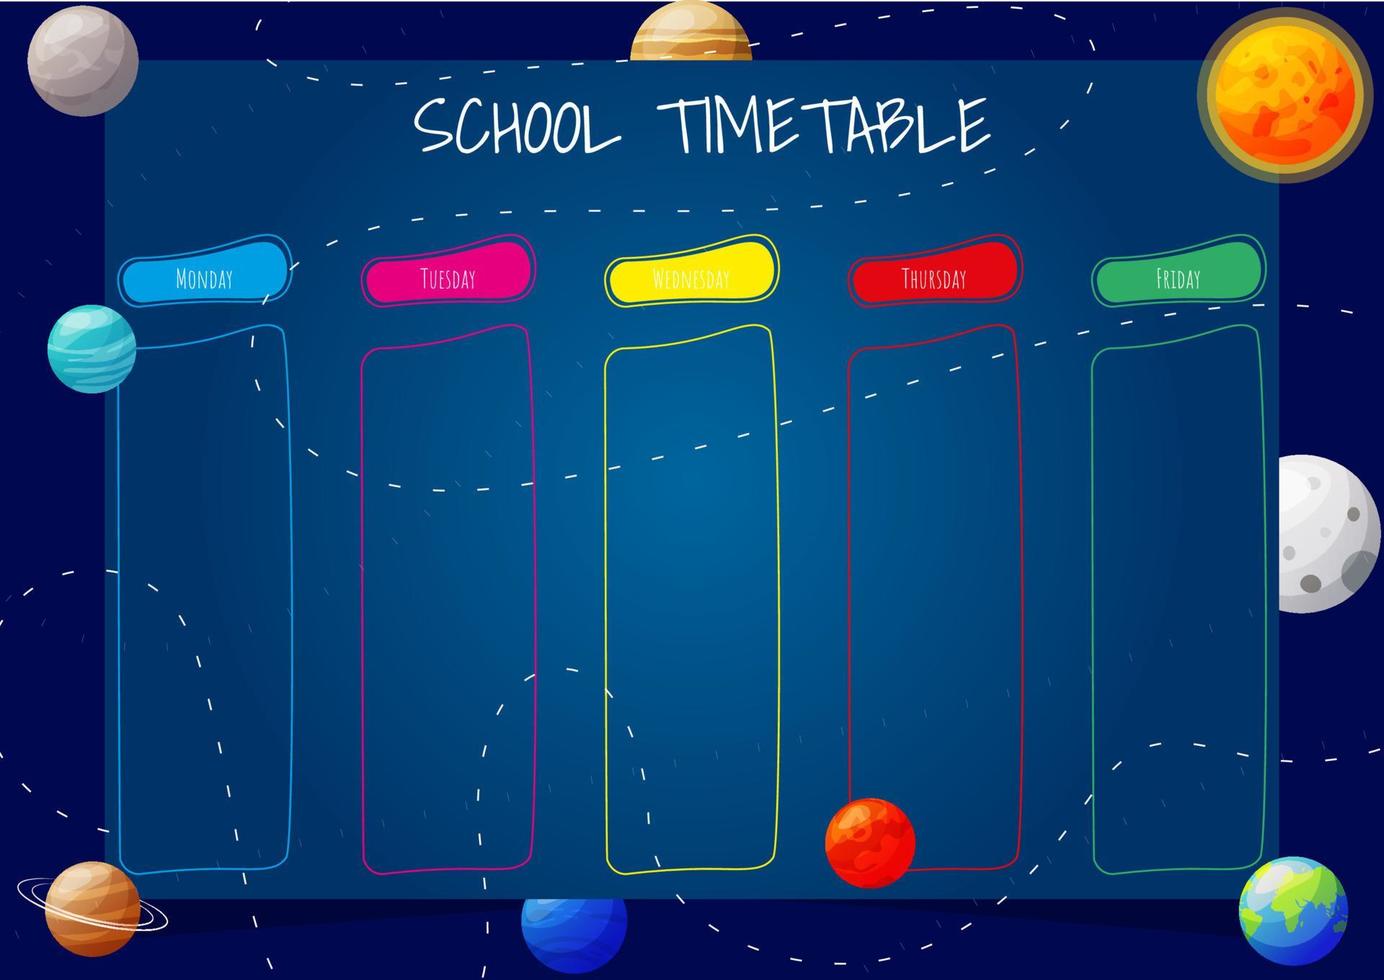 School timetable for kids with cartoon planets of the solar system on background. A4 size template.  Vector illustration